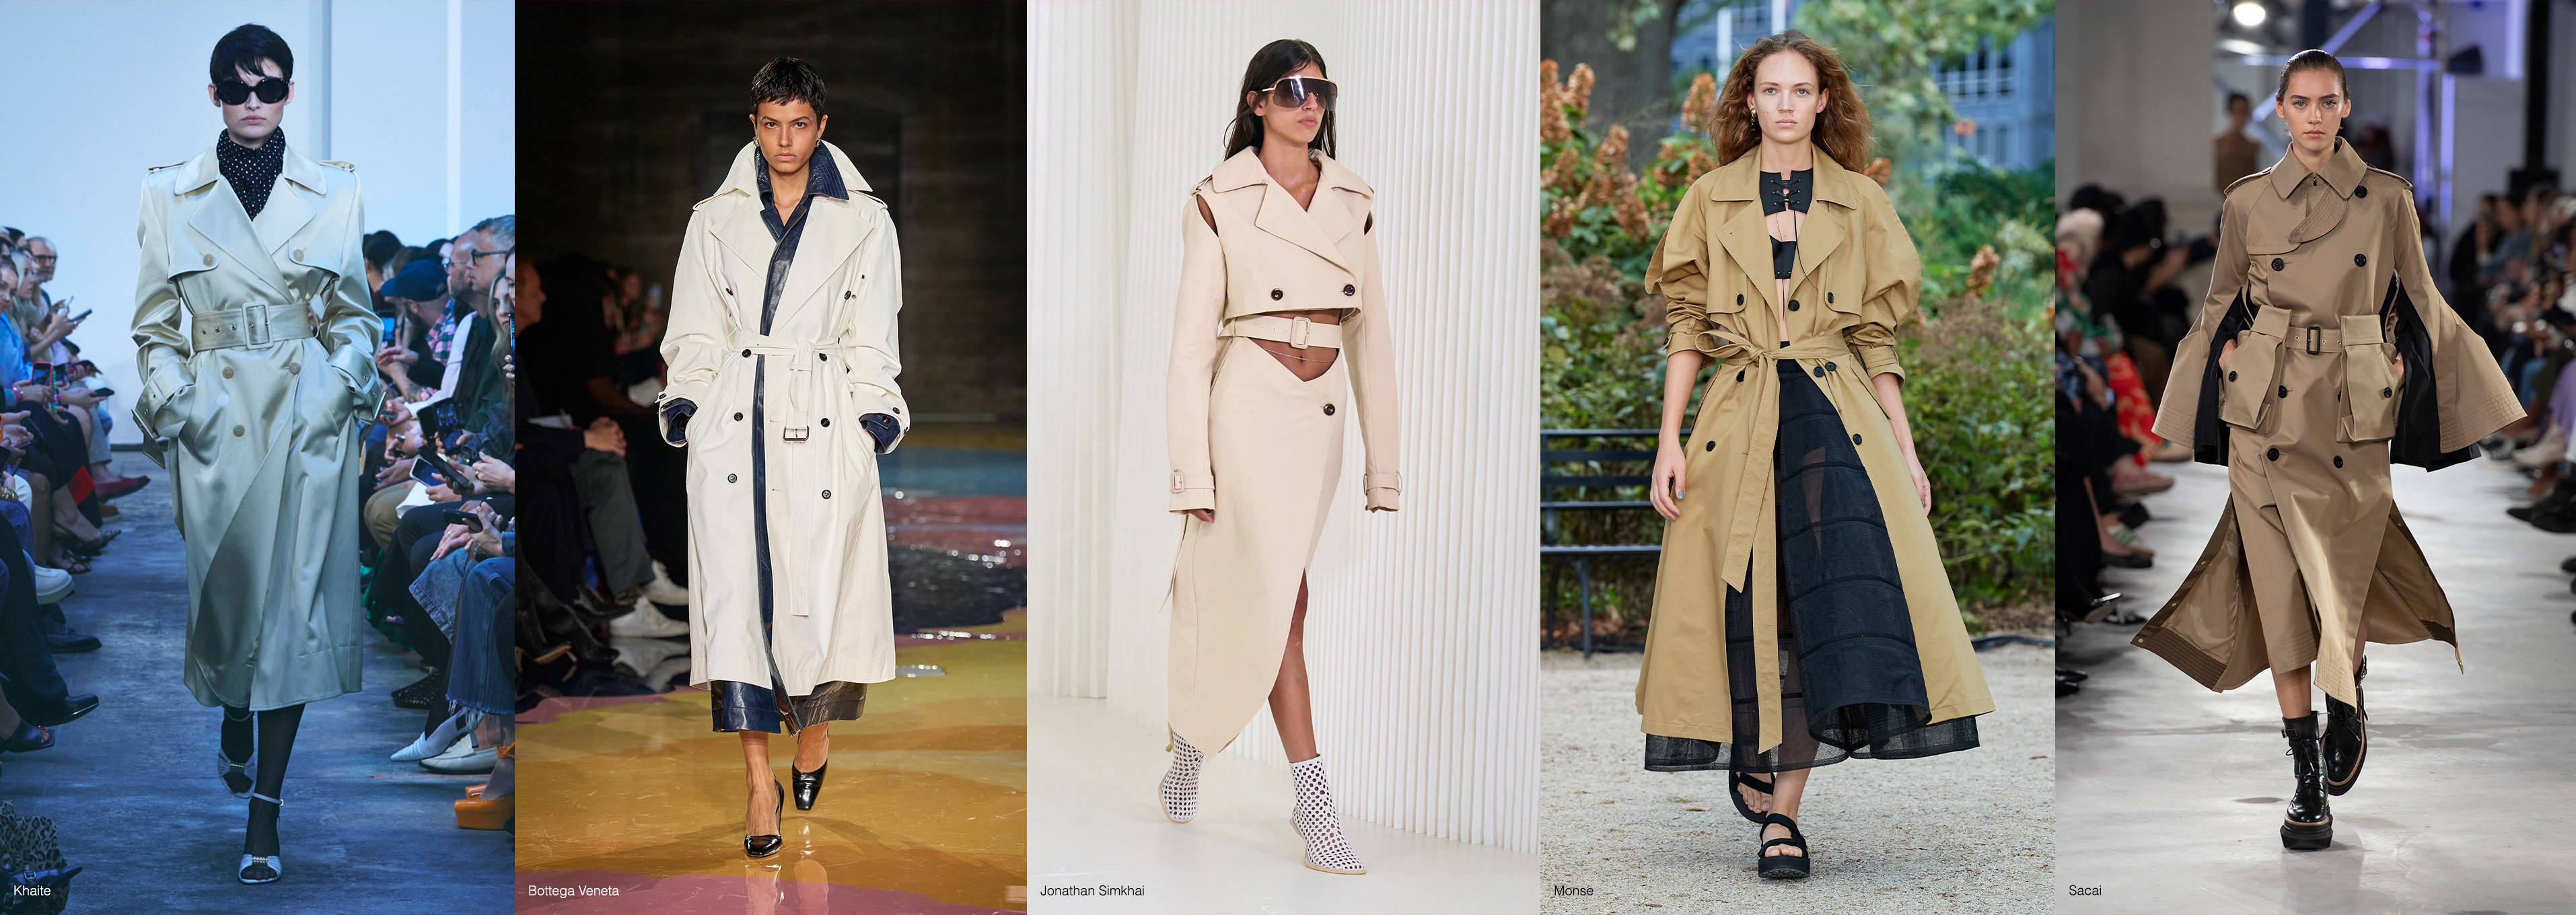 LVR Magazine: Spring ’23 - Fashion Trends - The Trench